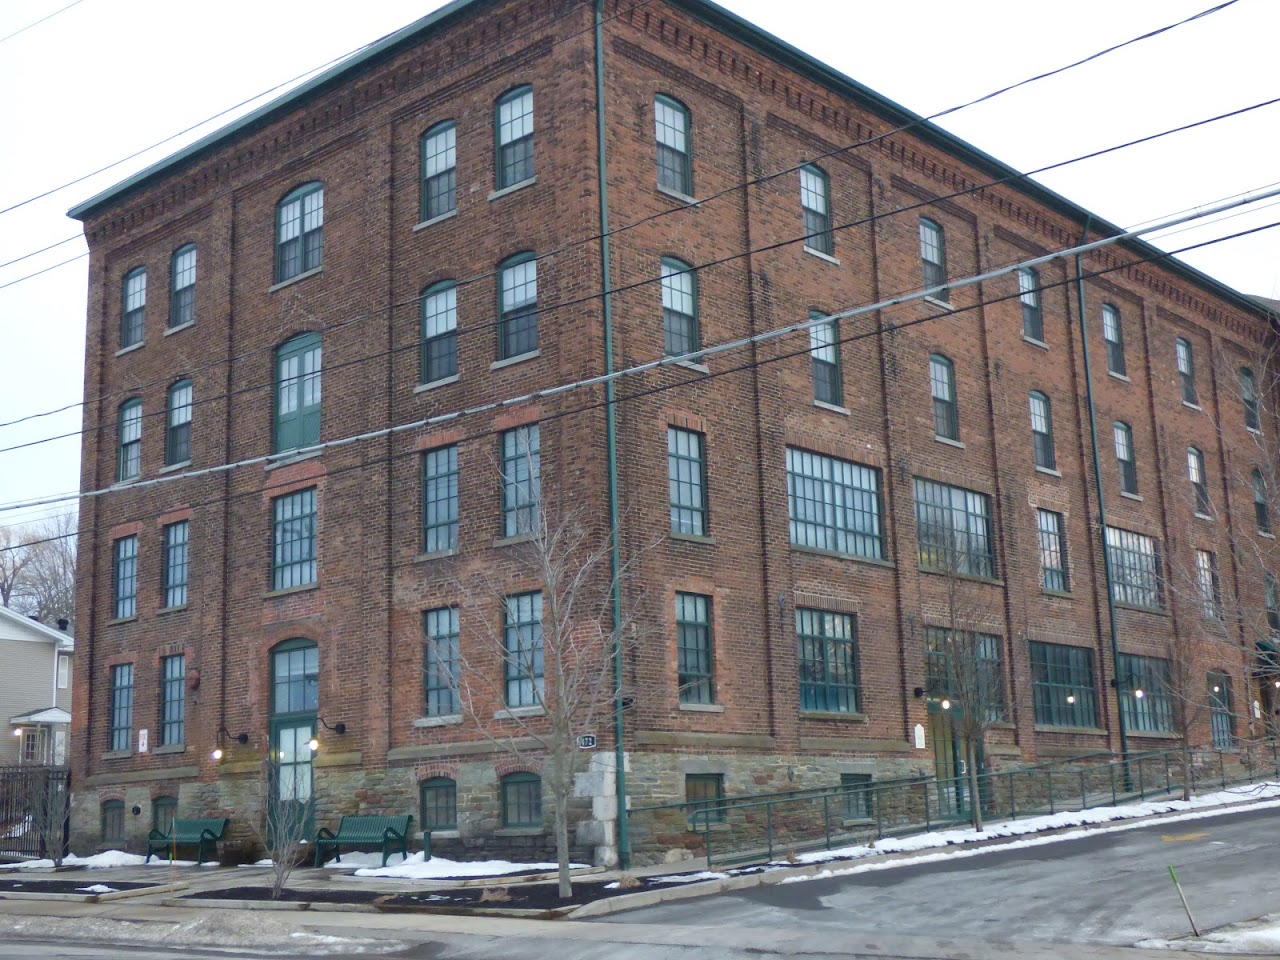 Photo of SEAWAY LOFTS. Affordable housing located at 472 W FIRST ST OSWEGO, NY 13126